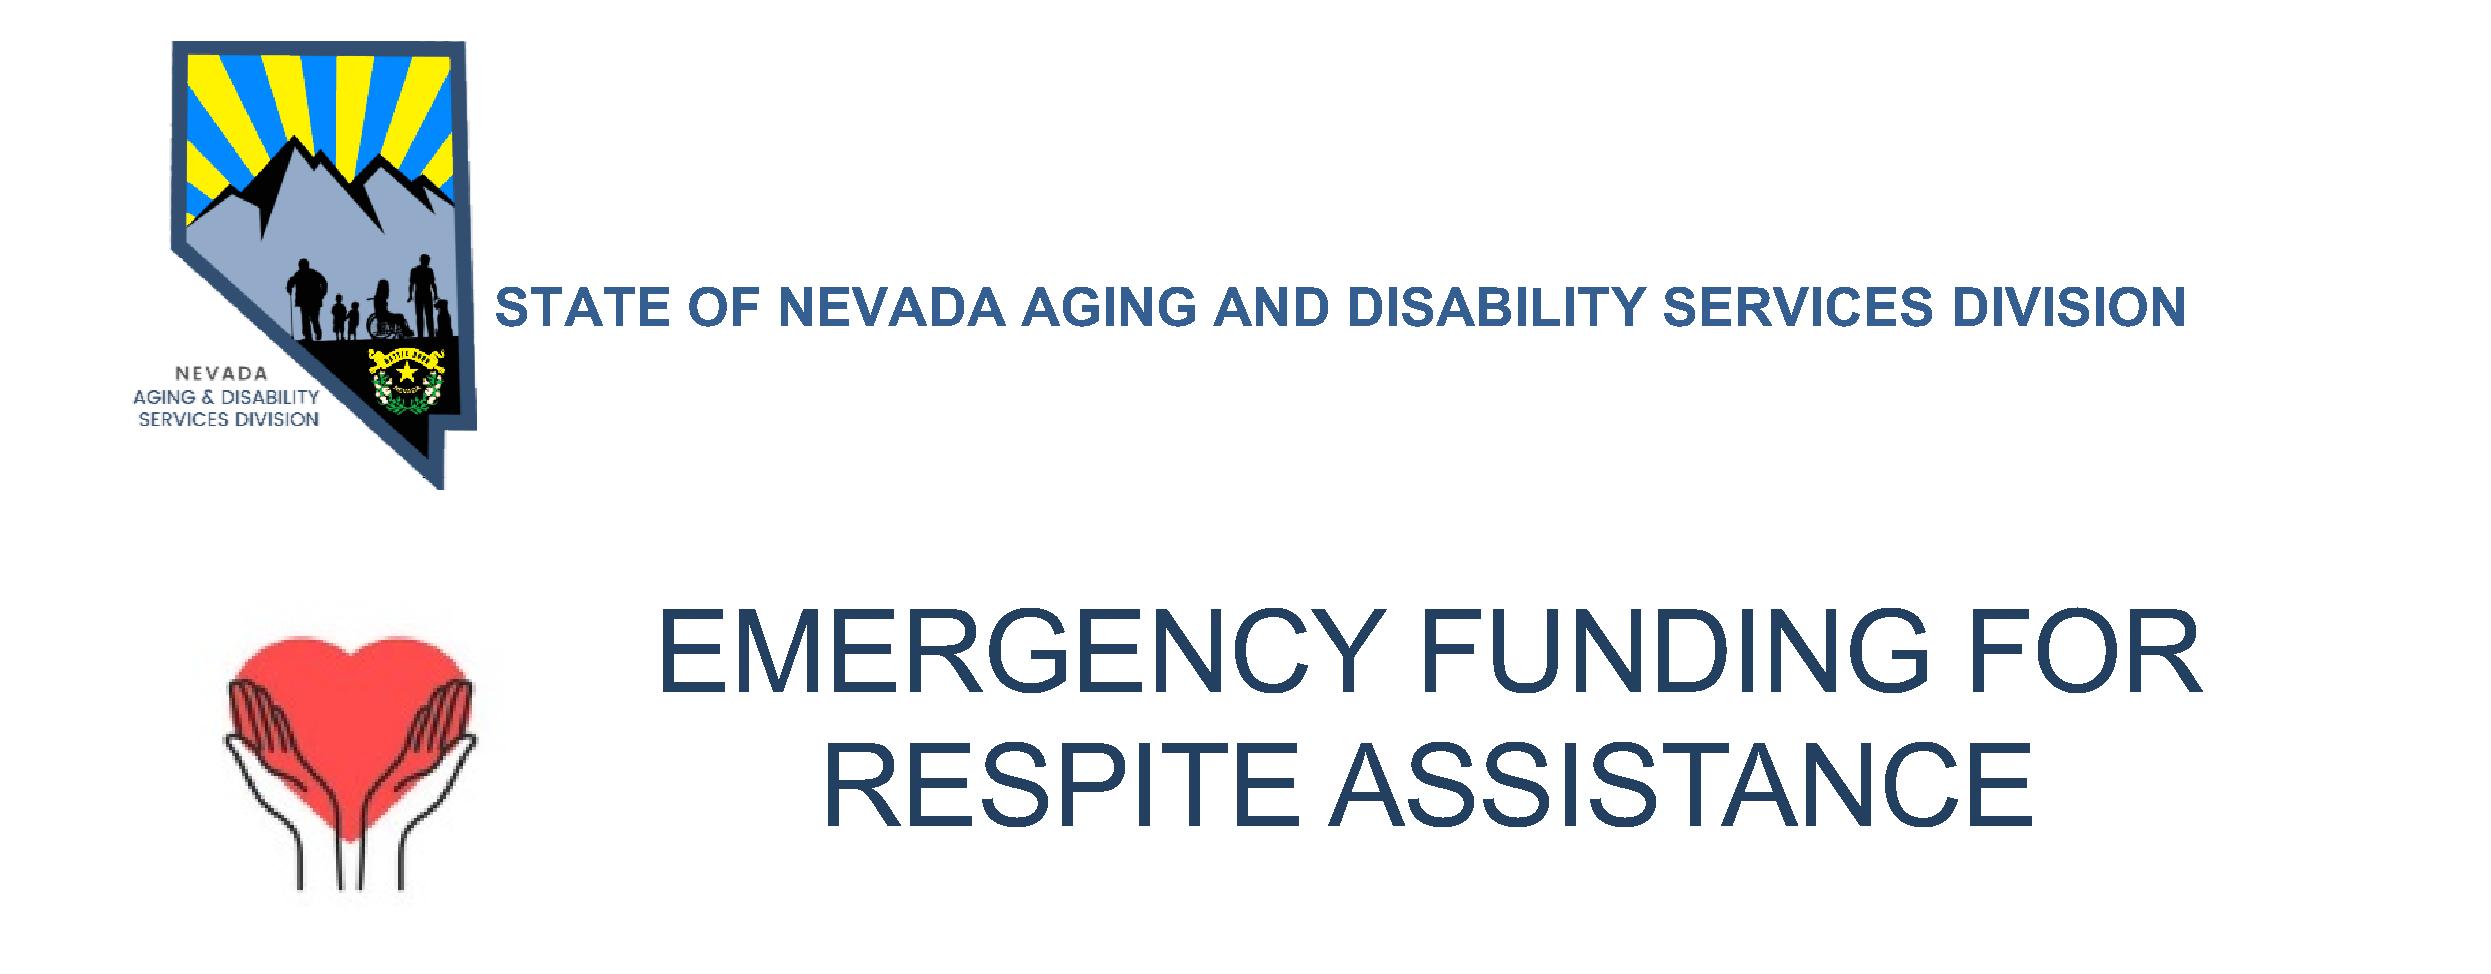 Emergency Funding For Respite Assistance